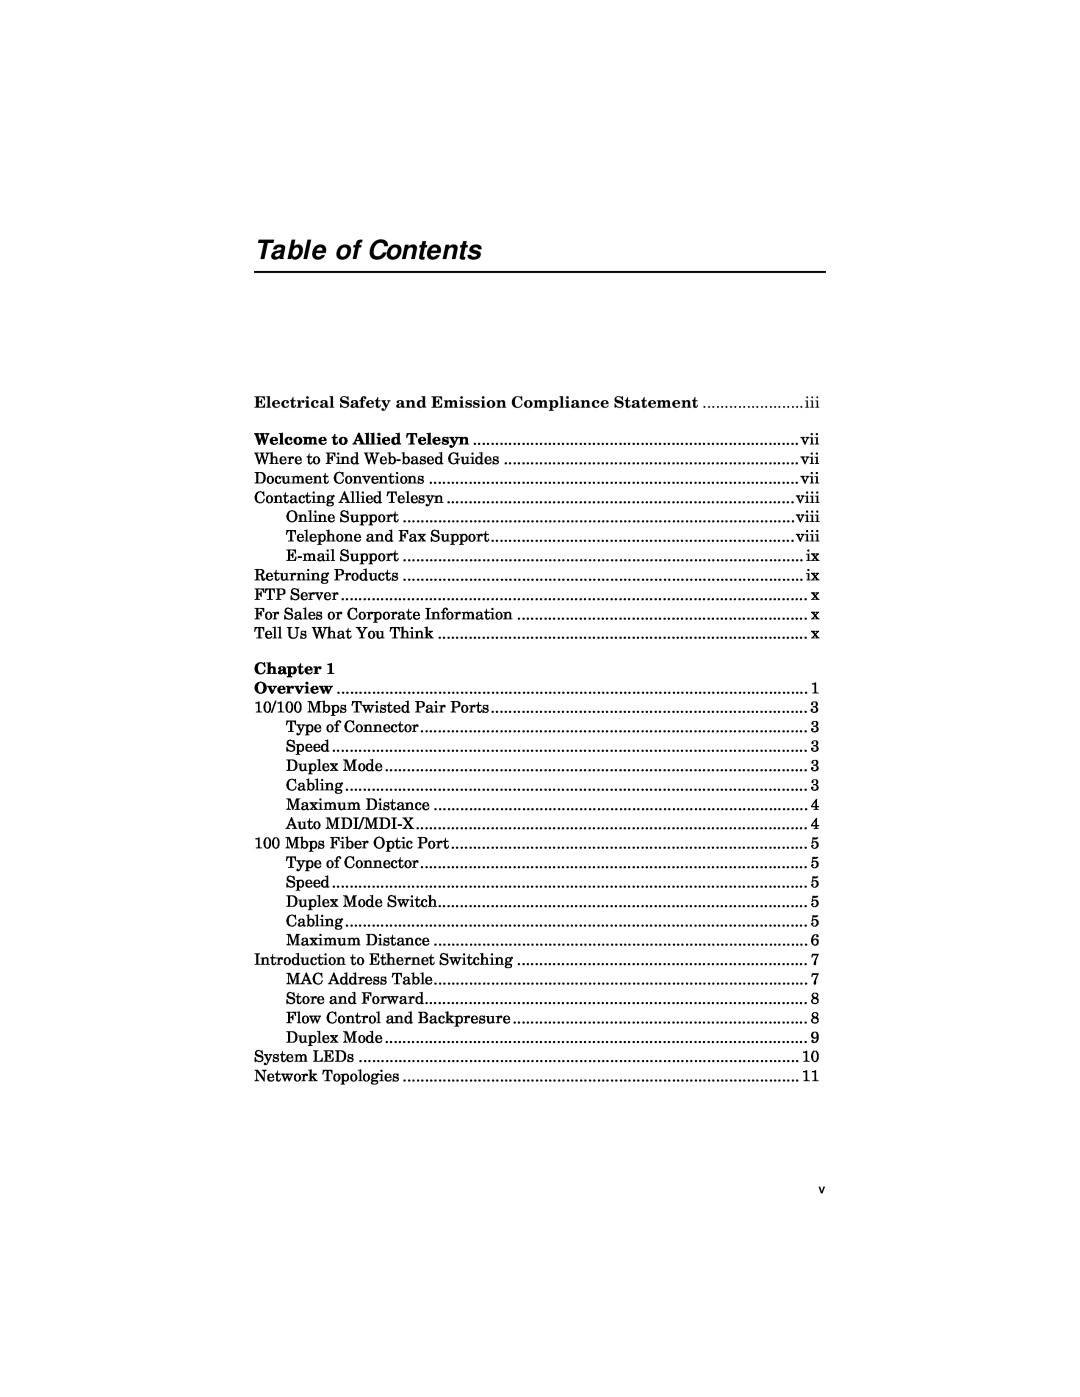 Allied Telesis ATFS705EFCSC60 manual Table of Contents, Electrical Safety and Emission Compliance Statement, Chapter 